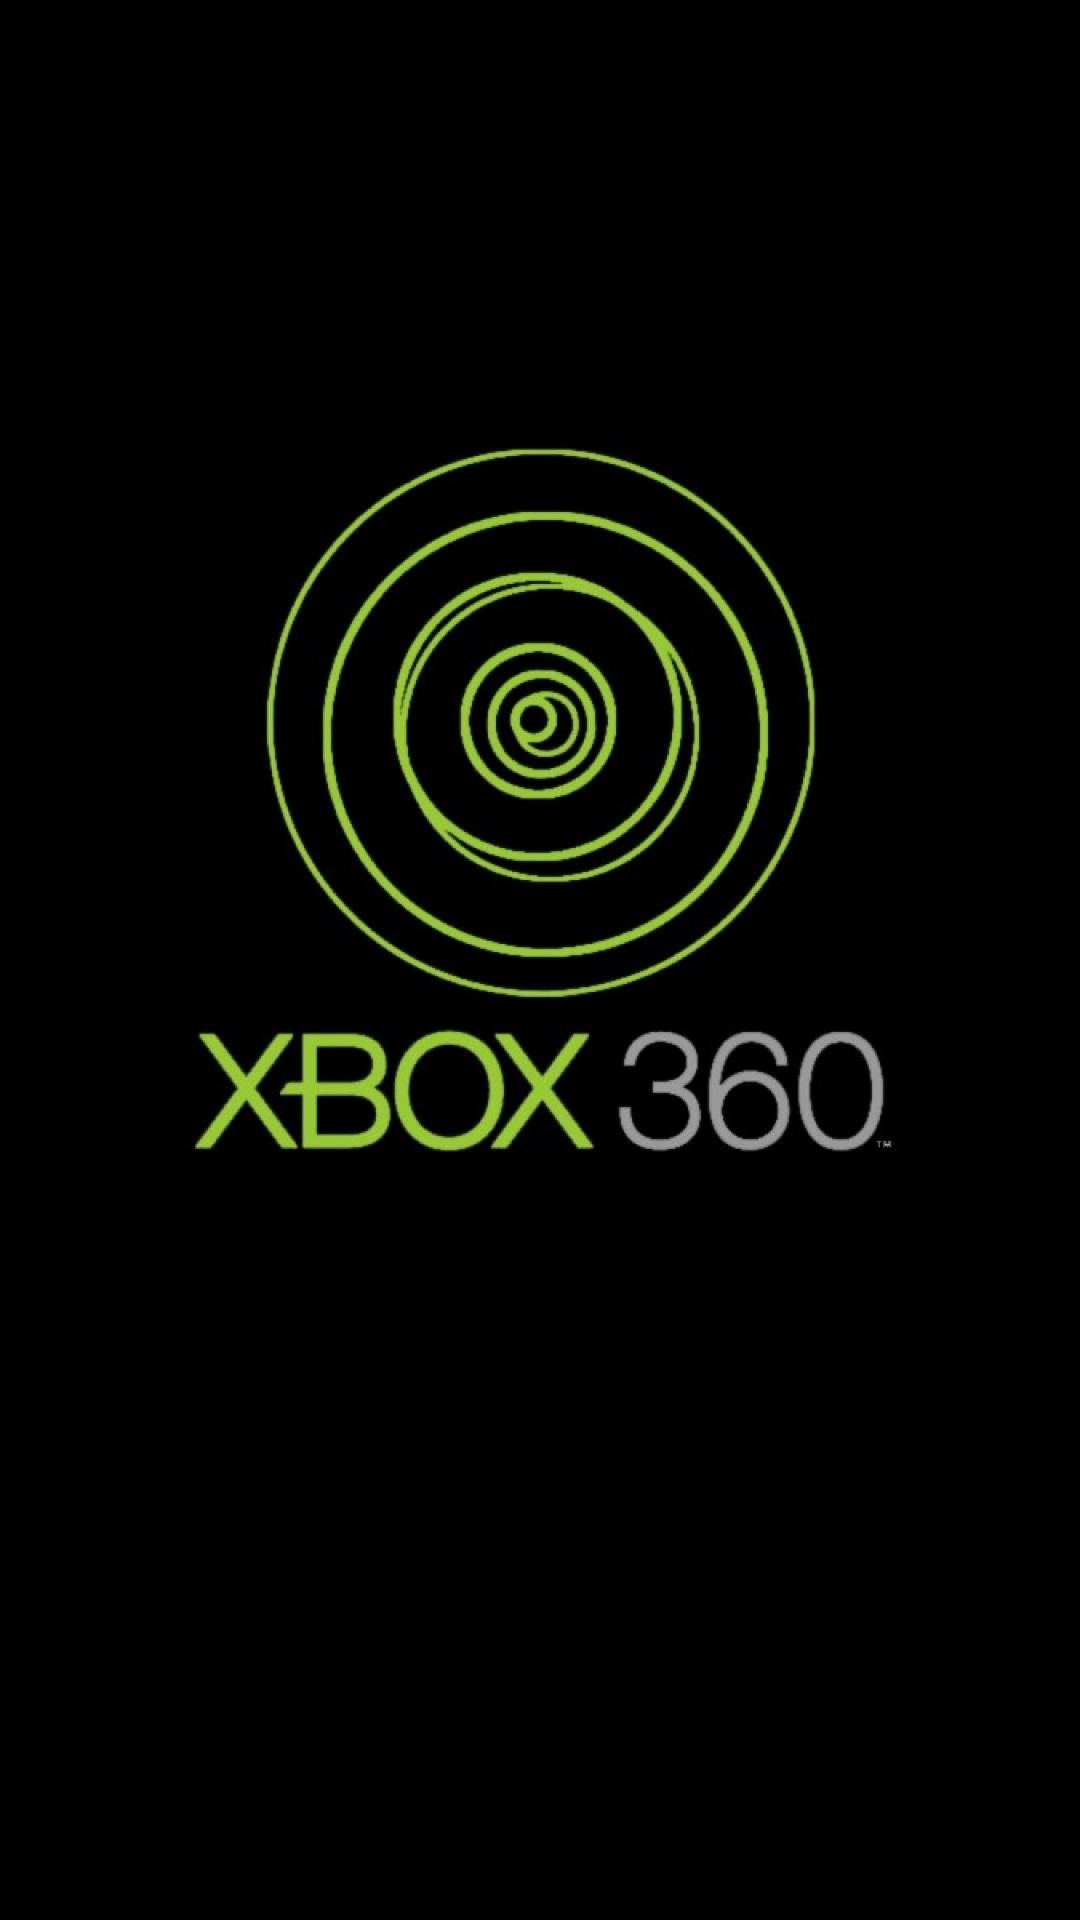 Xbox: 360, The second console in the series, Minimalistic. 1080x1920 Full HD Wallpaper.